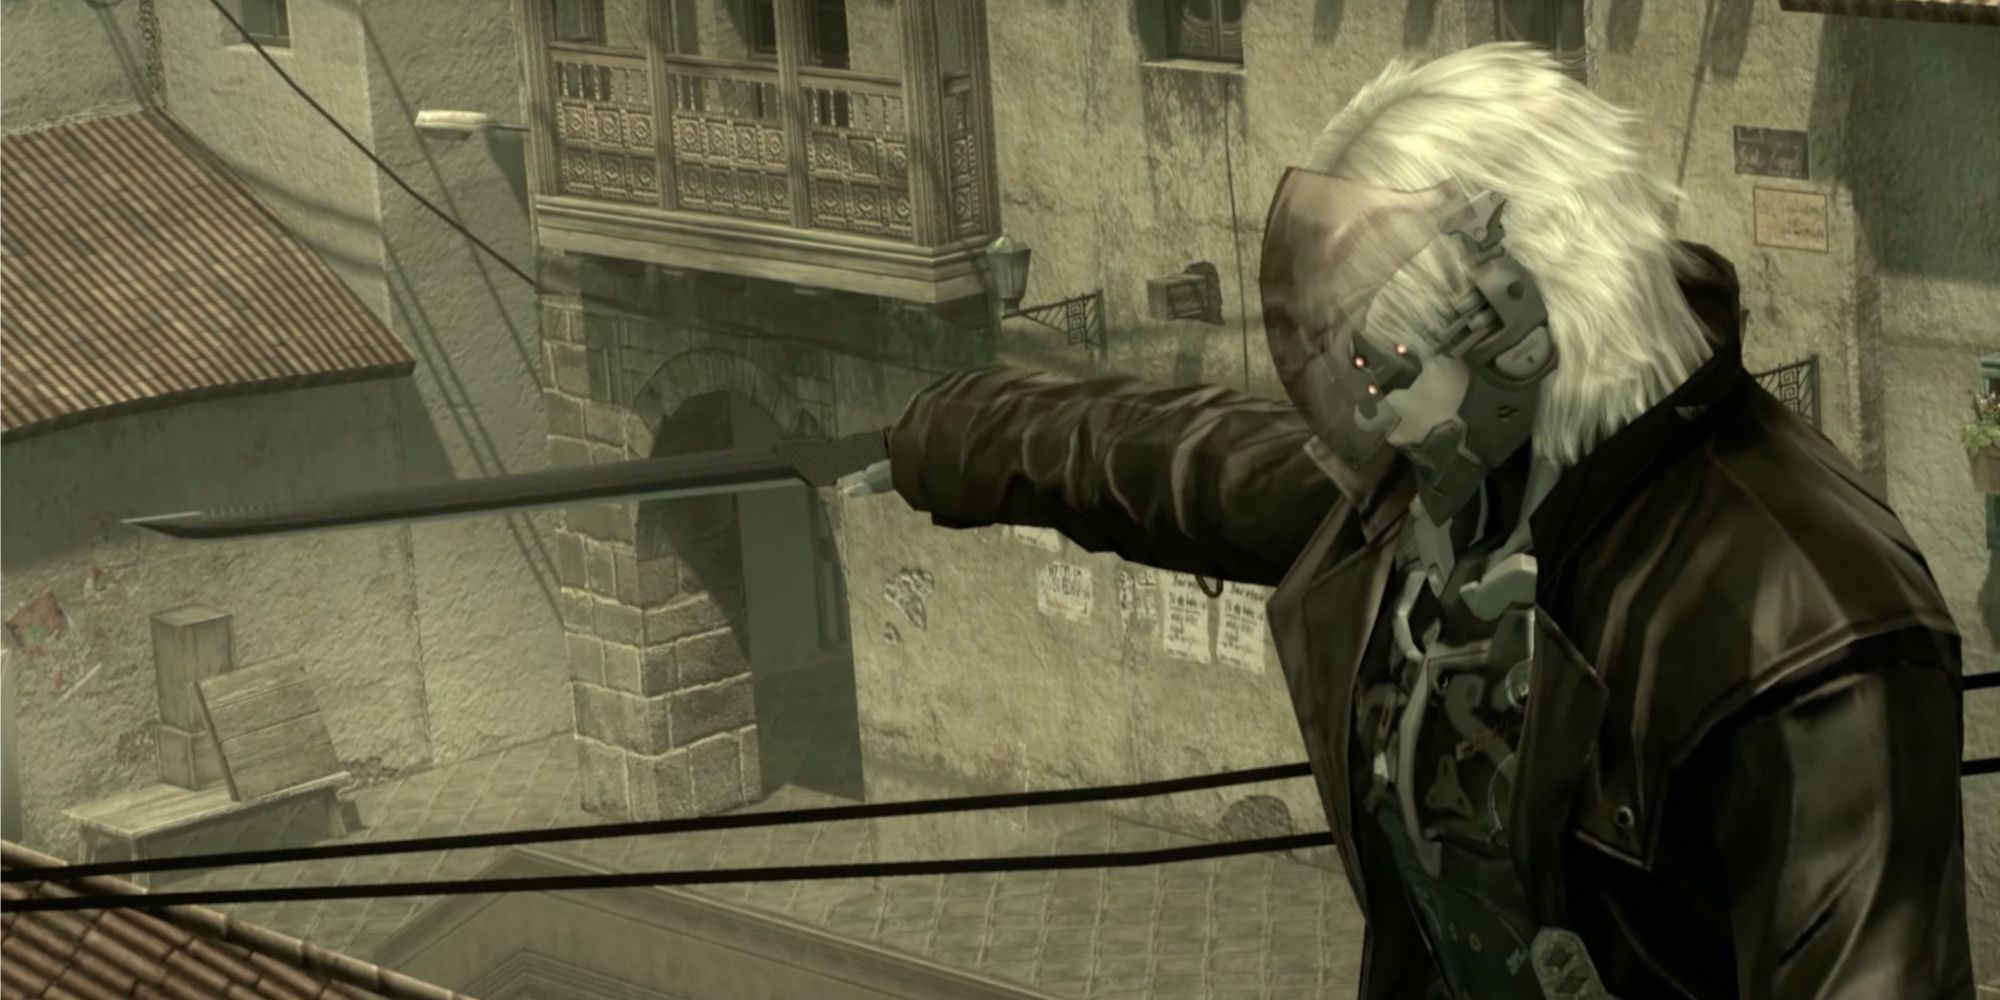 Raiden as seen in Metal Gear Solid 4 Guns of the Patriots